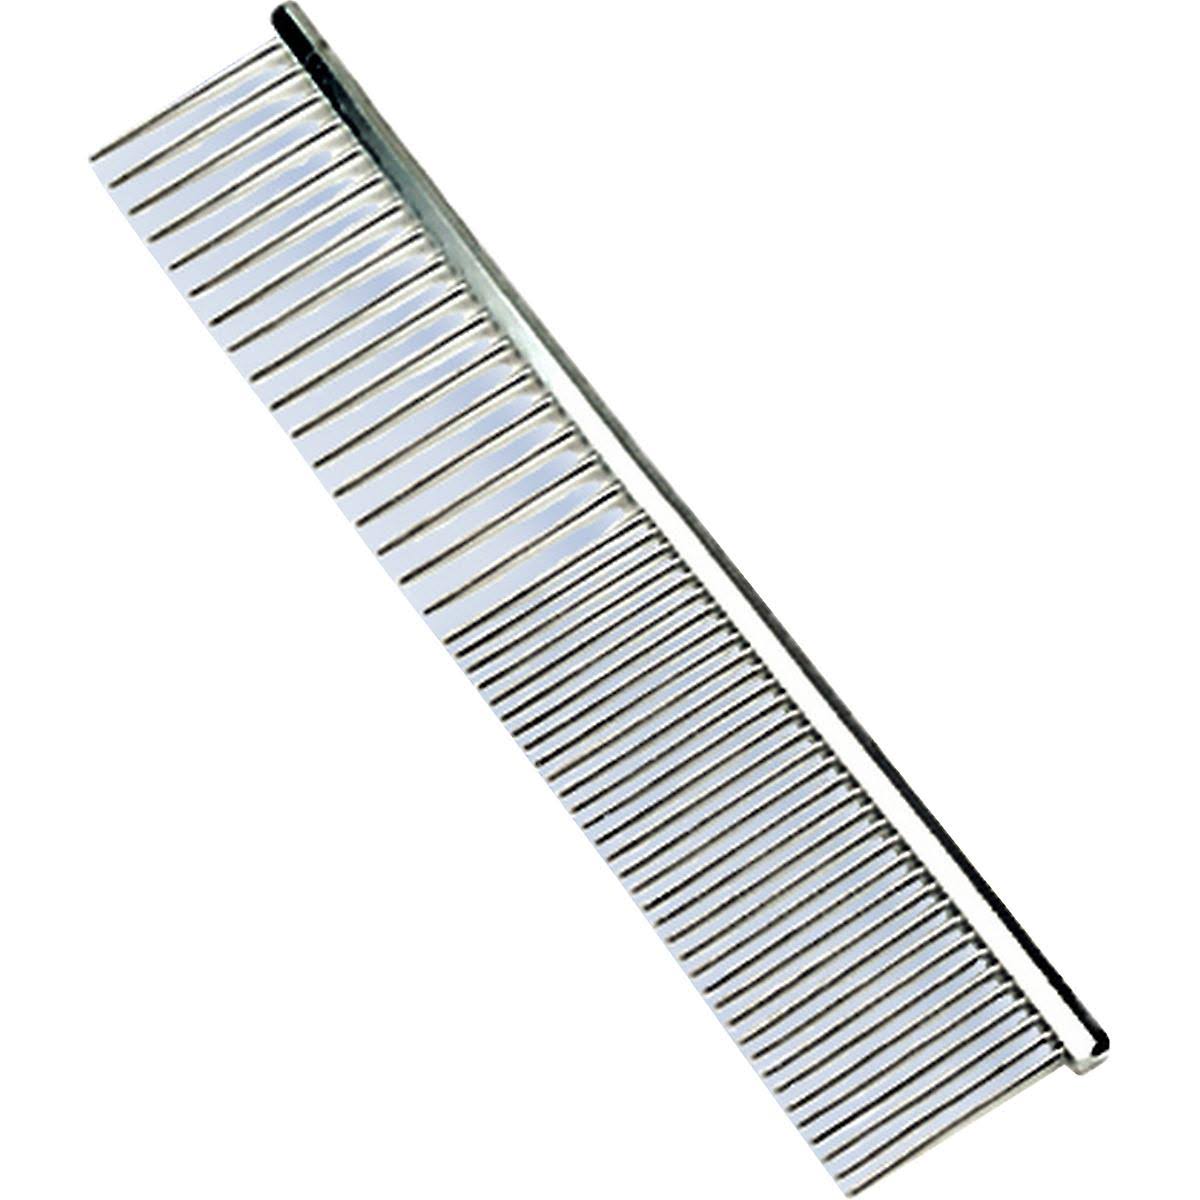 Safari Grooming Comb For Dogs - Stainless Steel, 7-1/4" Long